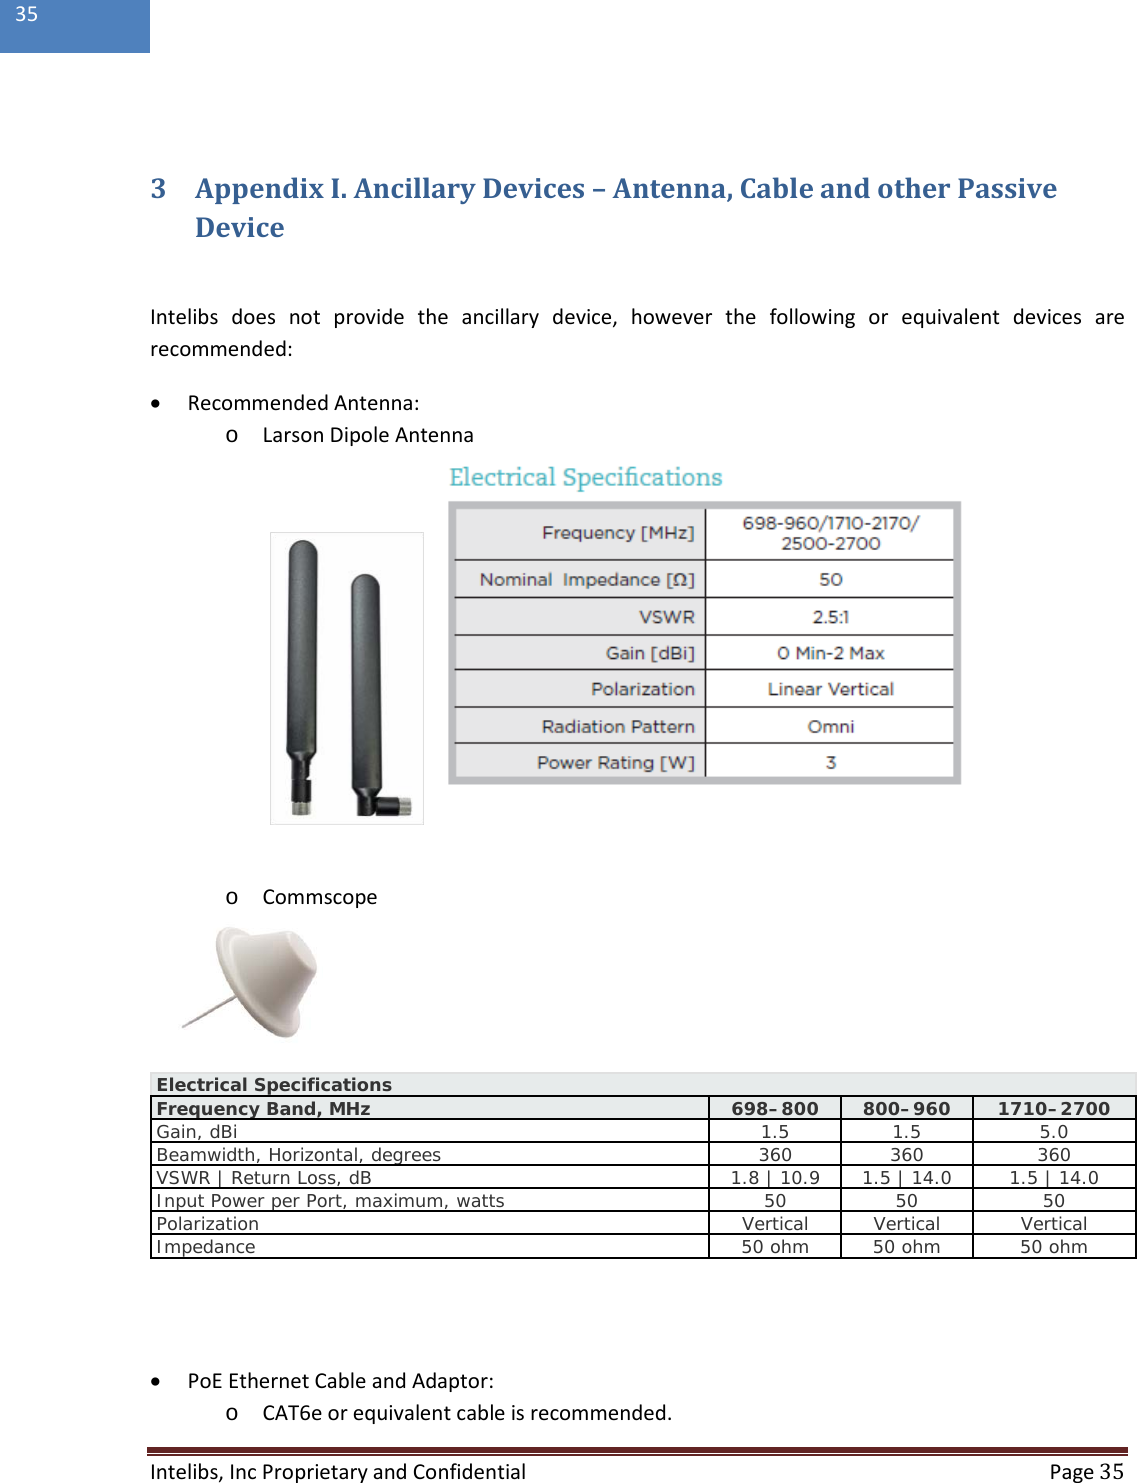  Intelibs, Inc Proprietary and Confidential  Page 35  35   3 Appendix I. Ancillary Devices – Antenna, Cable and other Passive Device  Intelibs does not provide the ancillary device, however the following or equivalent devices are recommended: • Recommended Antenna:  o Larson Dipole Antenna     o Commscope   Electrical Specifications Frequency Band, MHz 698–800 800–960 1710–2700 Gain, dBi 1.5 1.5 5.0 Beamwidth, Horizontal, degrees 360 360 360 VSWR | Return Loss, dB 1.8 | 10.9 1.5 | 14.0 1.5 | 14.0 Input Power per Port, maximum, watts 50 50 50 Polarization Vertical Vertical Vertical Impedance 50 ohm 50 ohm 50 ohm        • PoE Ethernet Cable and Adaptor:  o CAT6e or equivalent cable is recommended. 